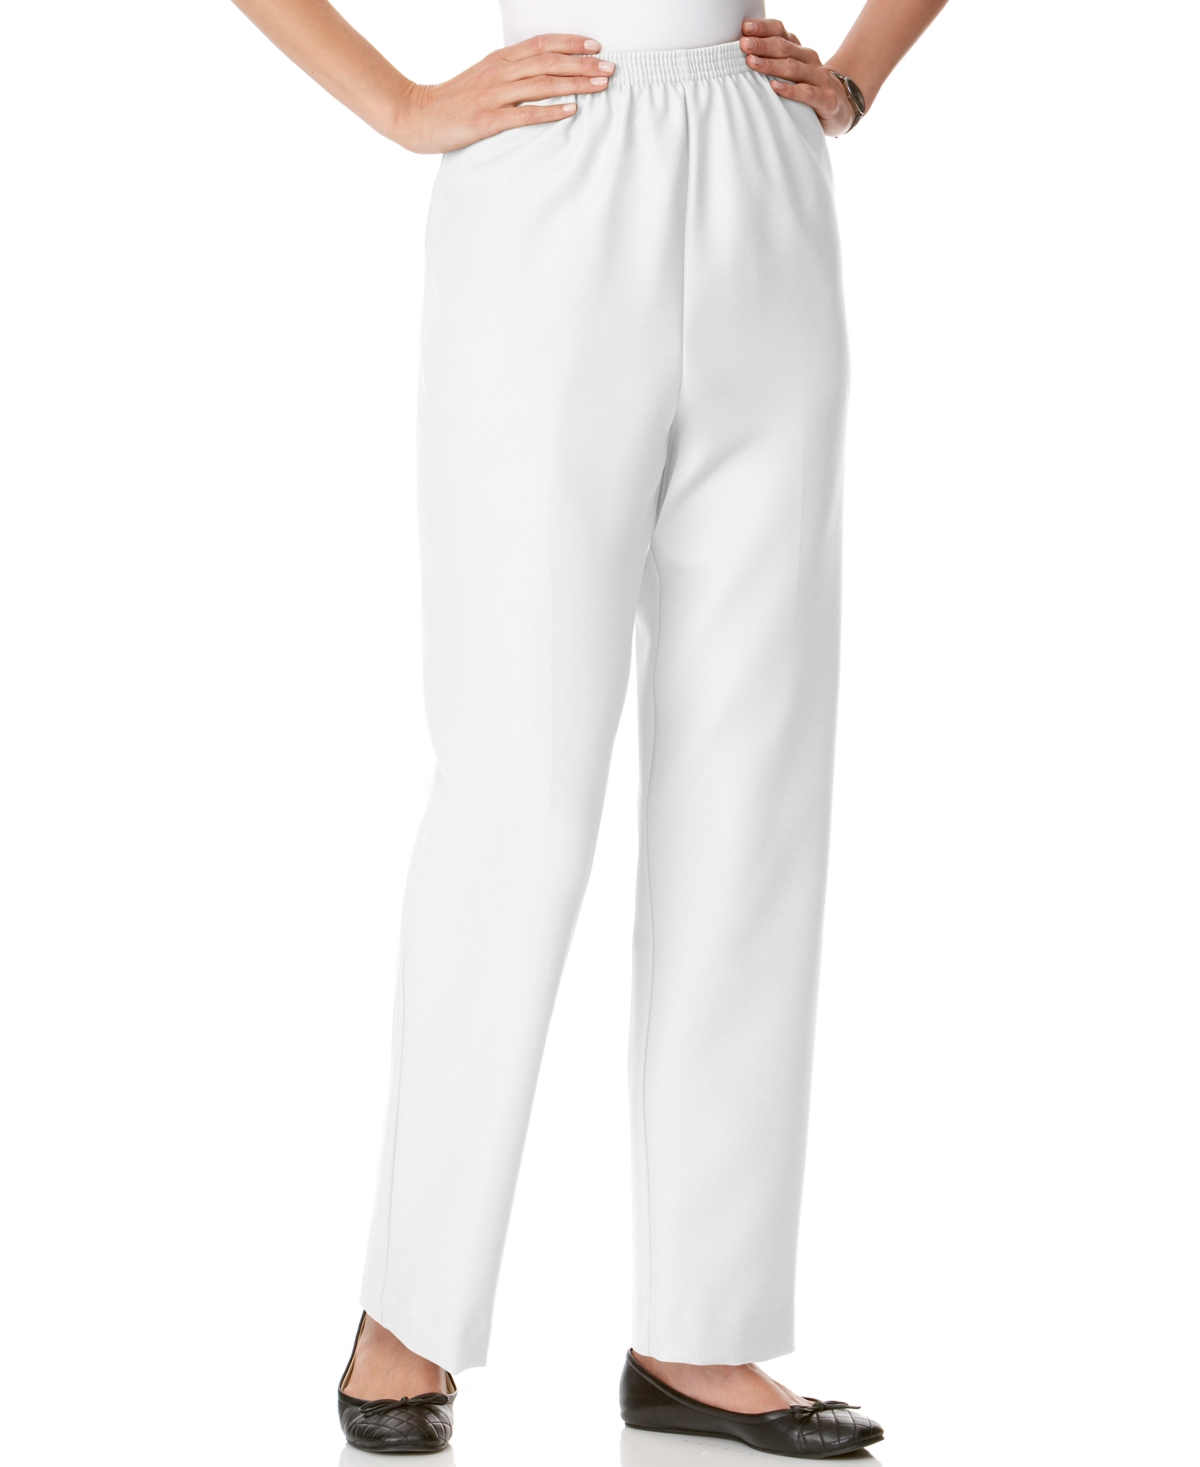 Alfred Dunner Classics Pull-On Straight-Leg Pants in Petite and Petite Short  & Reviews - Pants & Capris - Petites - Macy's